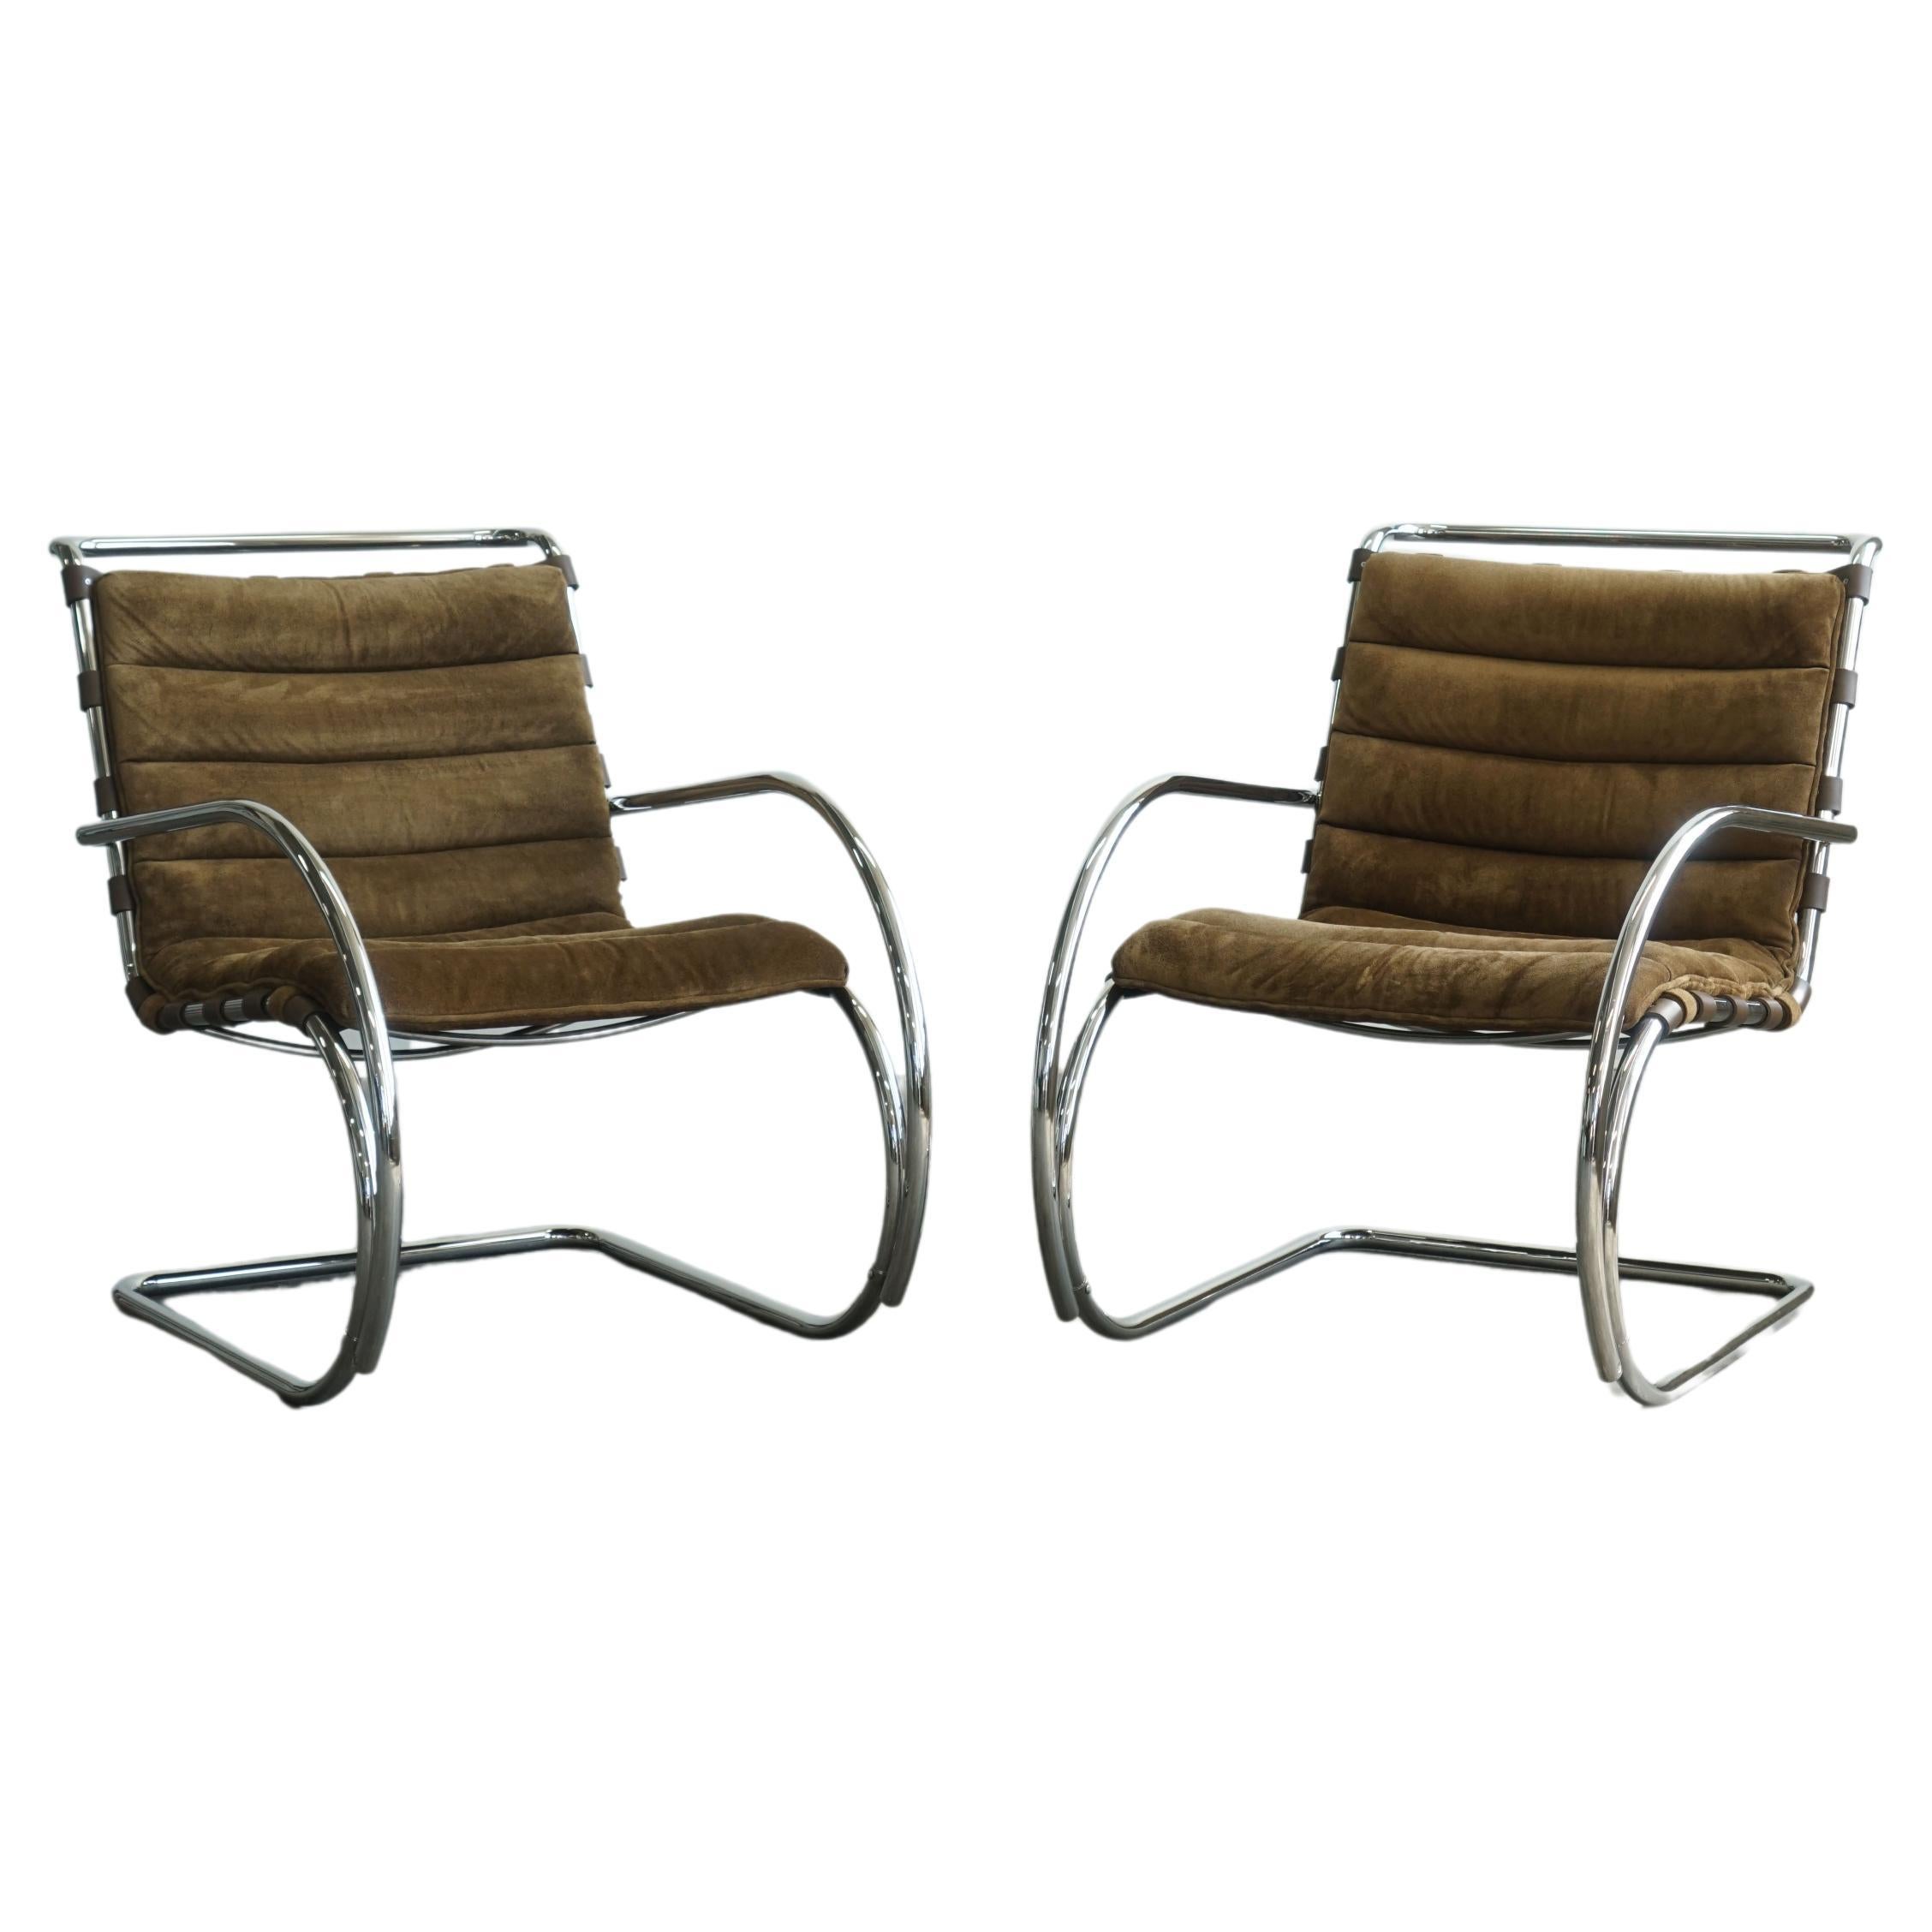 Pair of Mies Van der Rohe MR Lounge Chairs with arms for Knoll, brown suede  For Sale